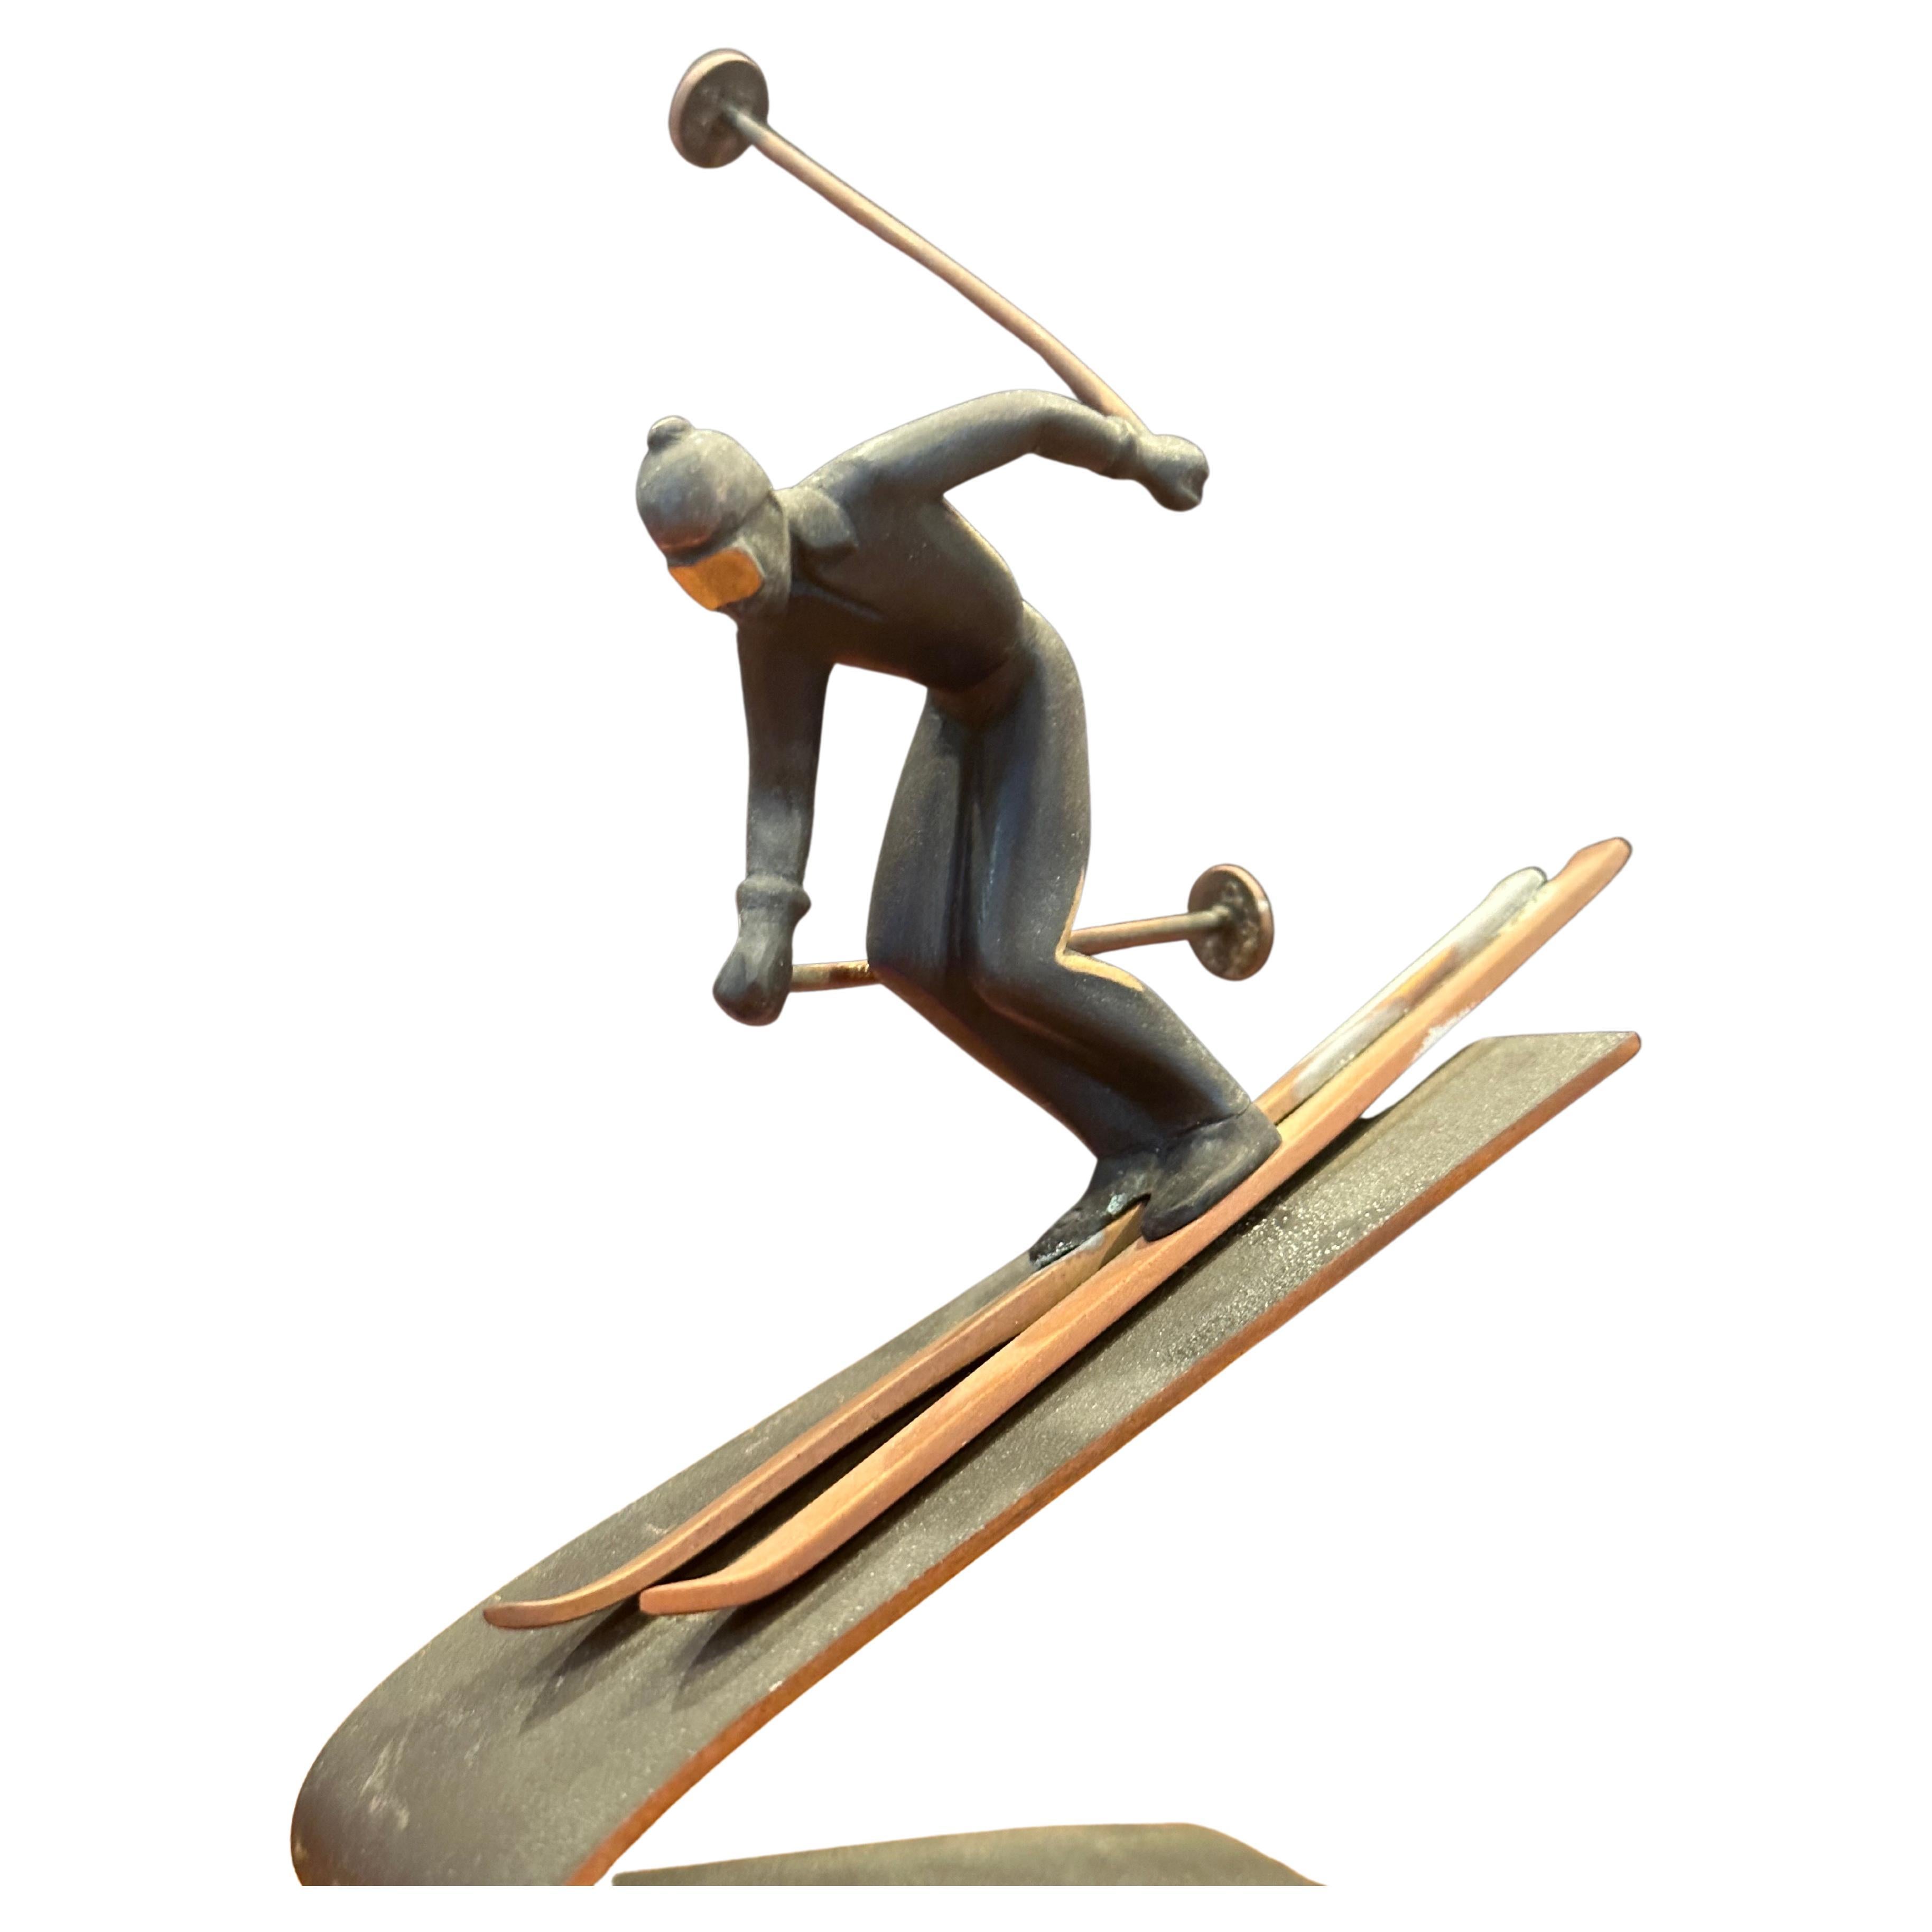 A very cool small mixed metals downhill skier sculpture, circa 1980s. The piece is signed 